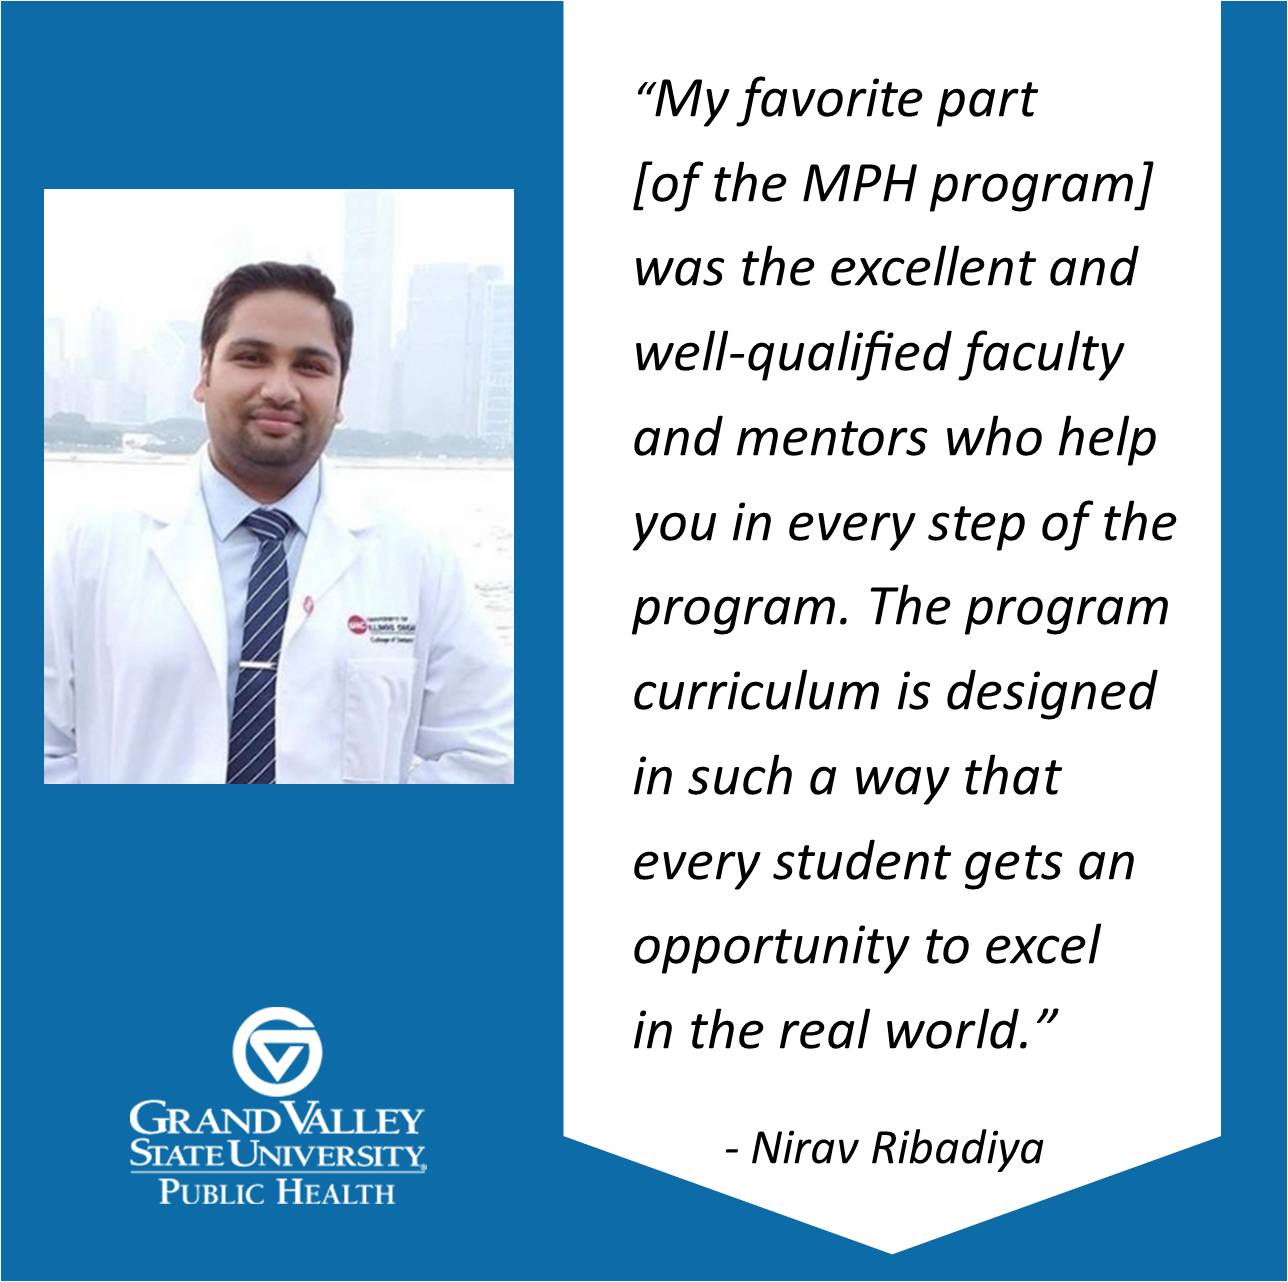 Nirav Ribadiya '17 says, "My favorite part [of the MPH program] was the excellent and well-qualified faculty and mentors who help you in every step of the program. The program curriculum is designed in such a way that every student gets an opportunity to excel in the real world.&#8221;